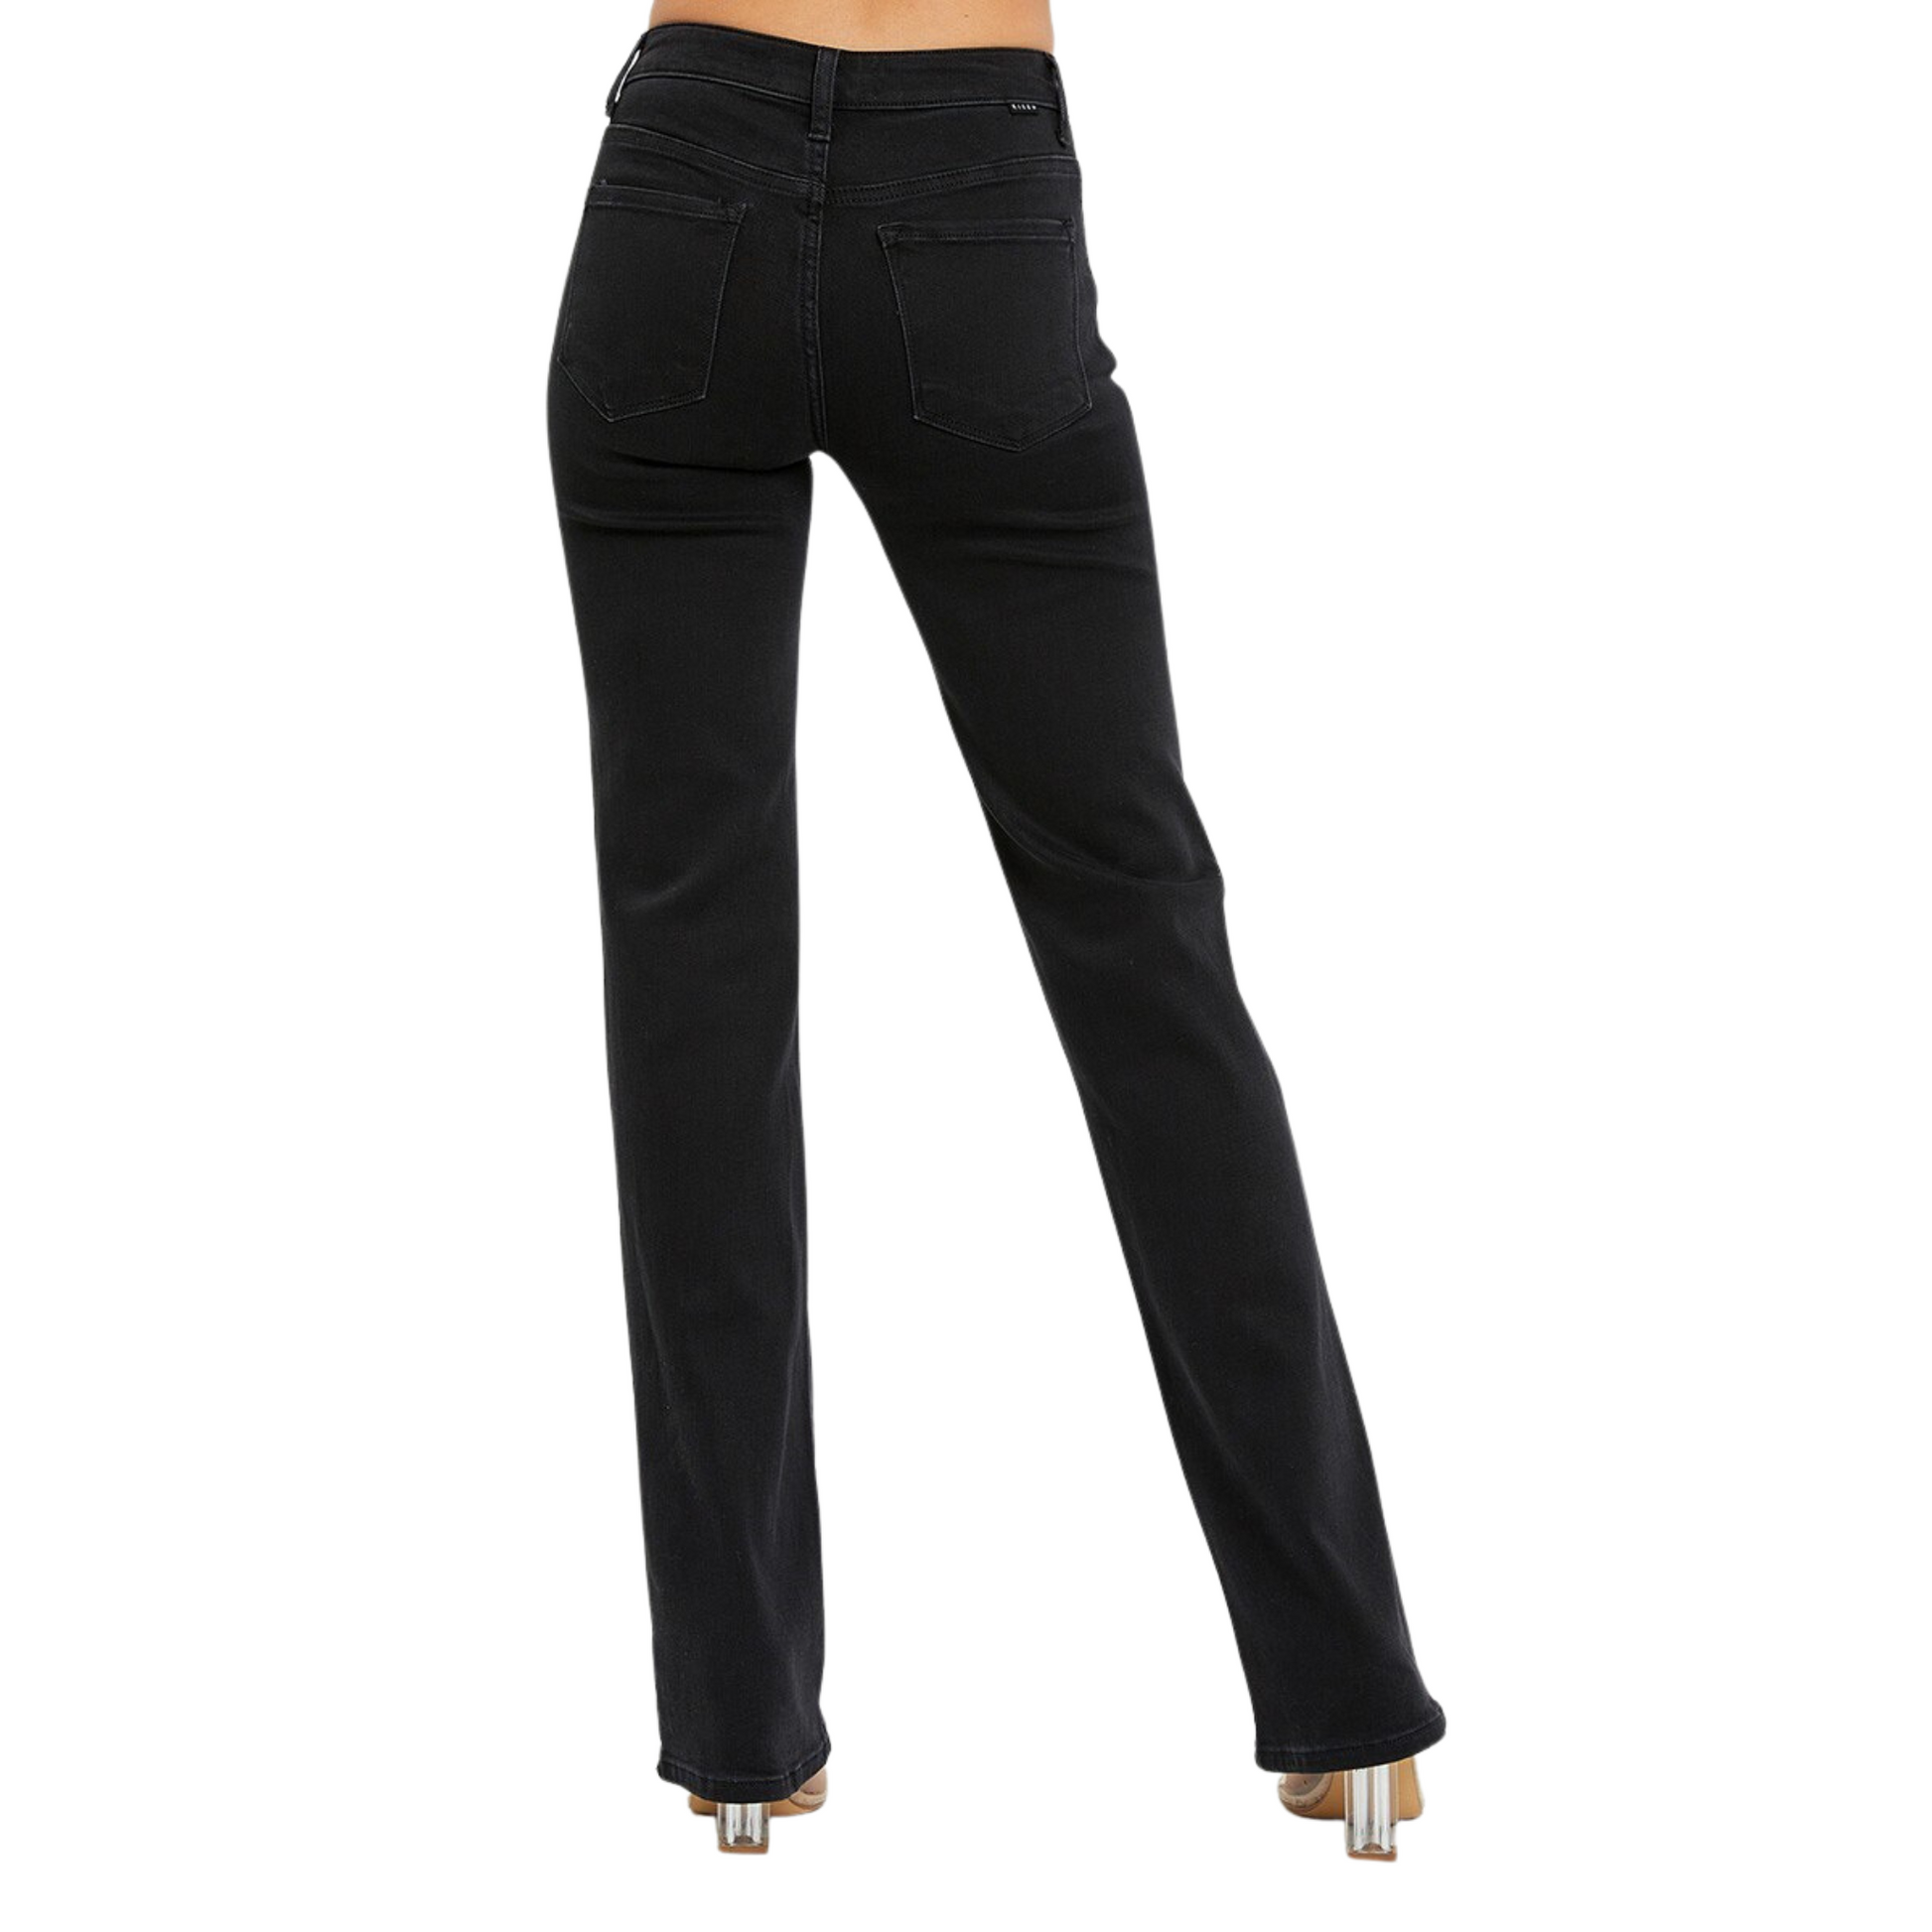 Risen's Mid Rise Slim Straight Jeans combine a classic cut with modern styling. The mid-rise waist enhances comfort and offers a sleek silhouette. In a timeless black color, these jeans can be styled for any occasion.